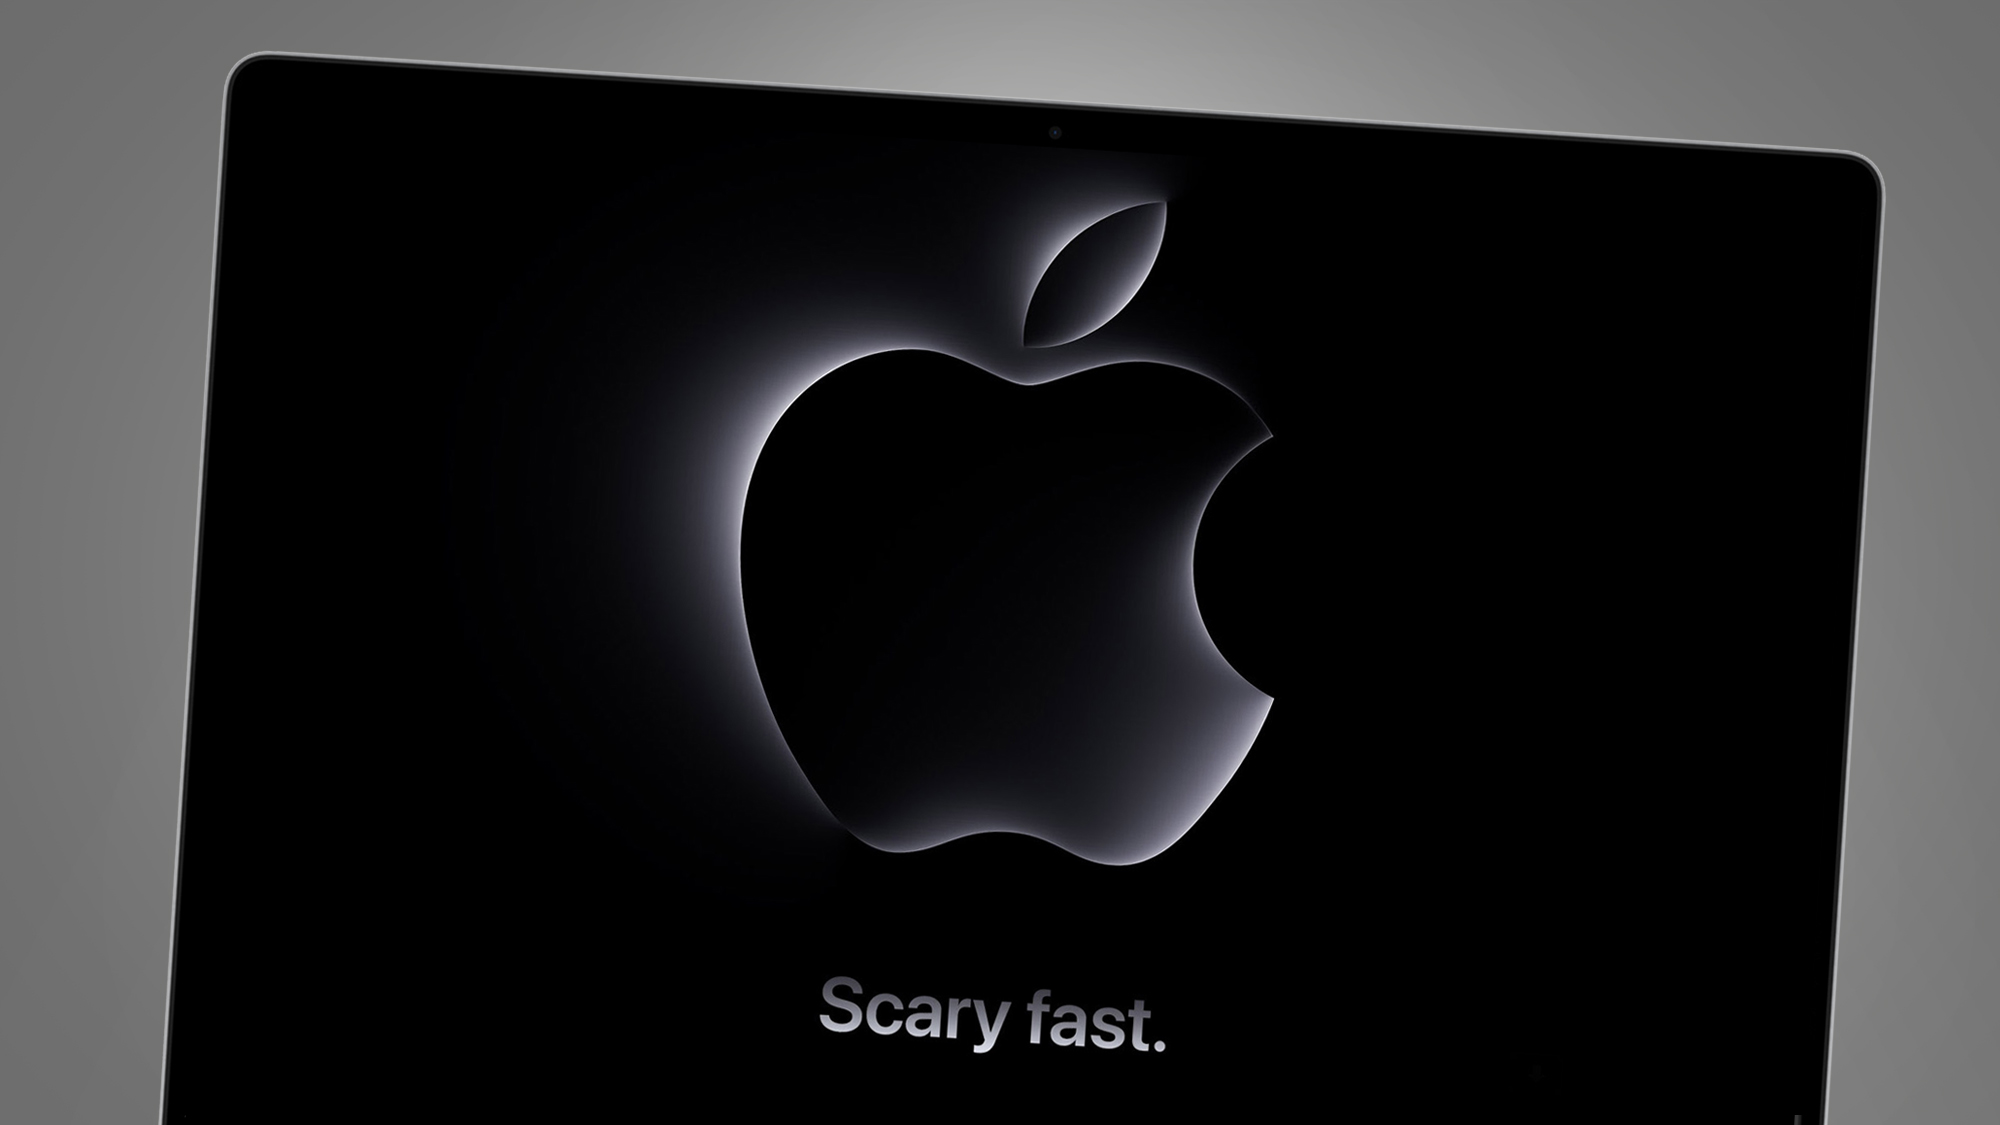 Apple’s Scary Fast October Mac Event: How To Watch And What To Expect Tonight